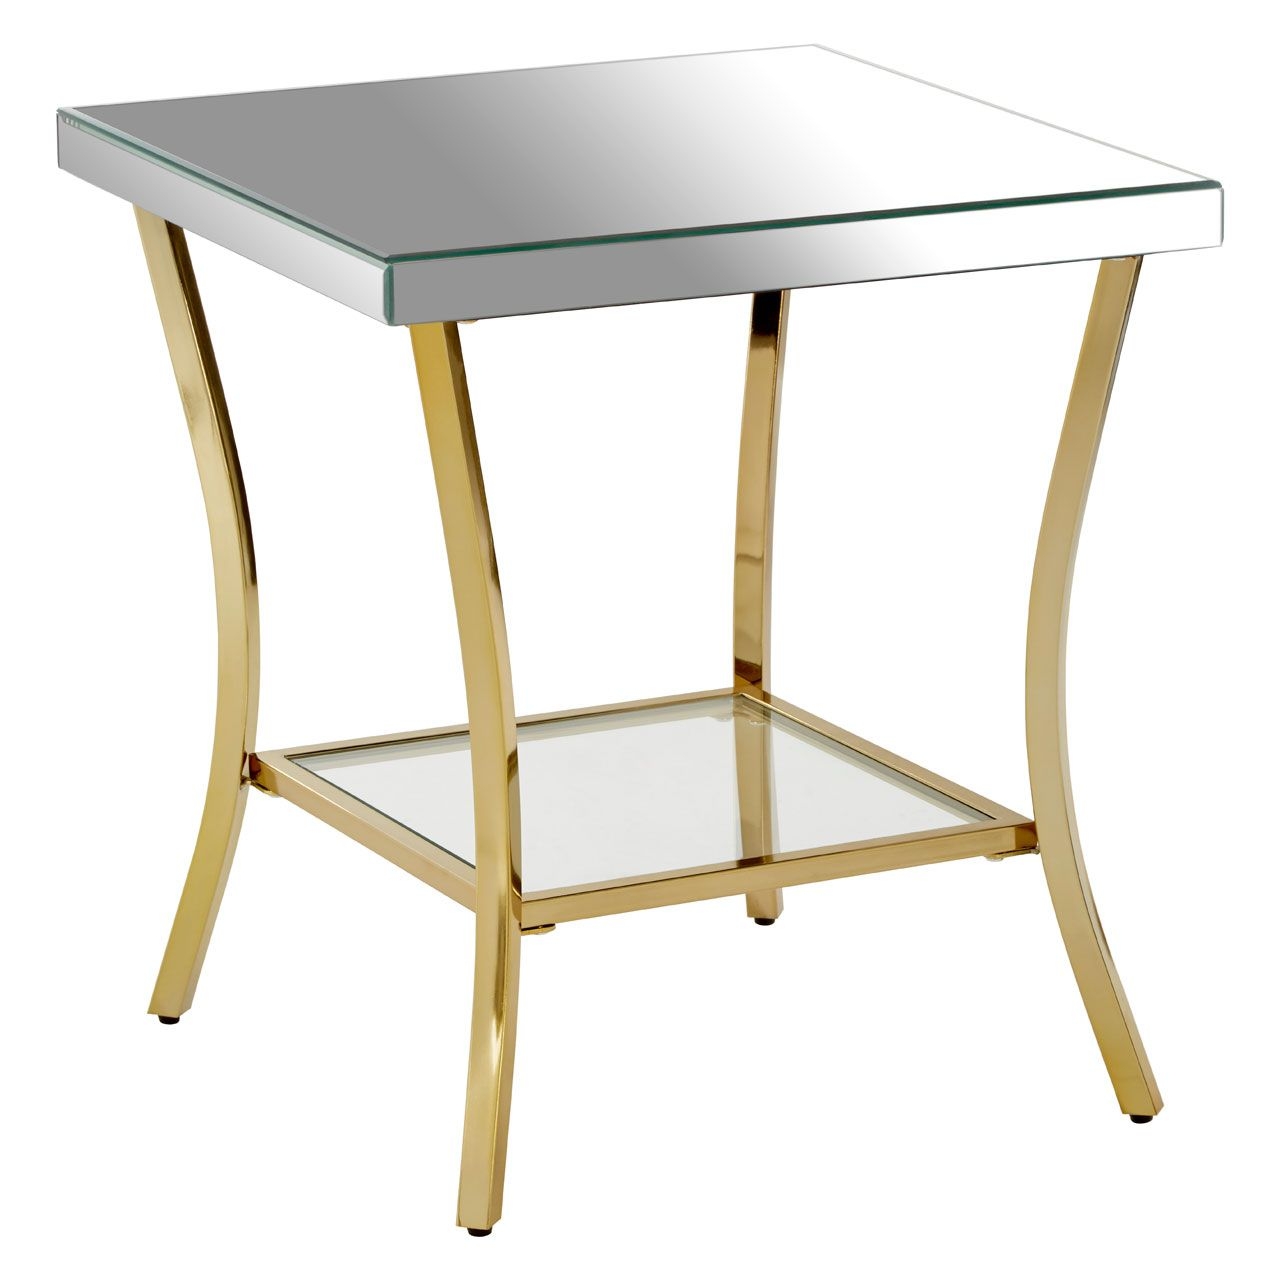 Ianto Mirrored Glass Side Table With Gold Metal Legs